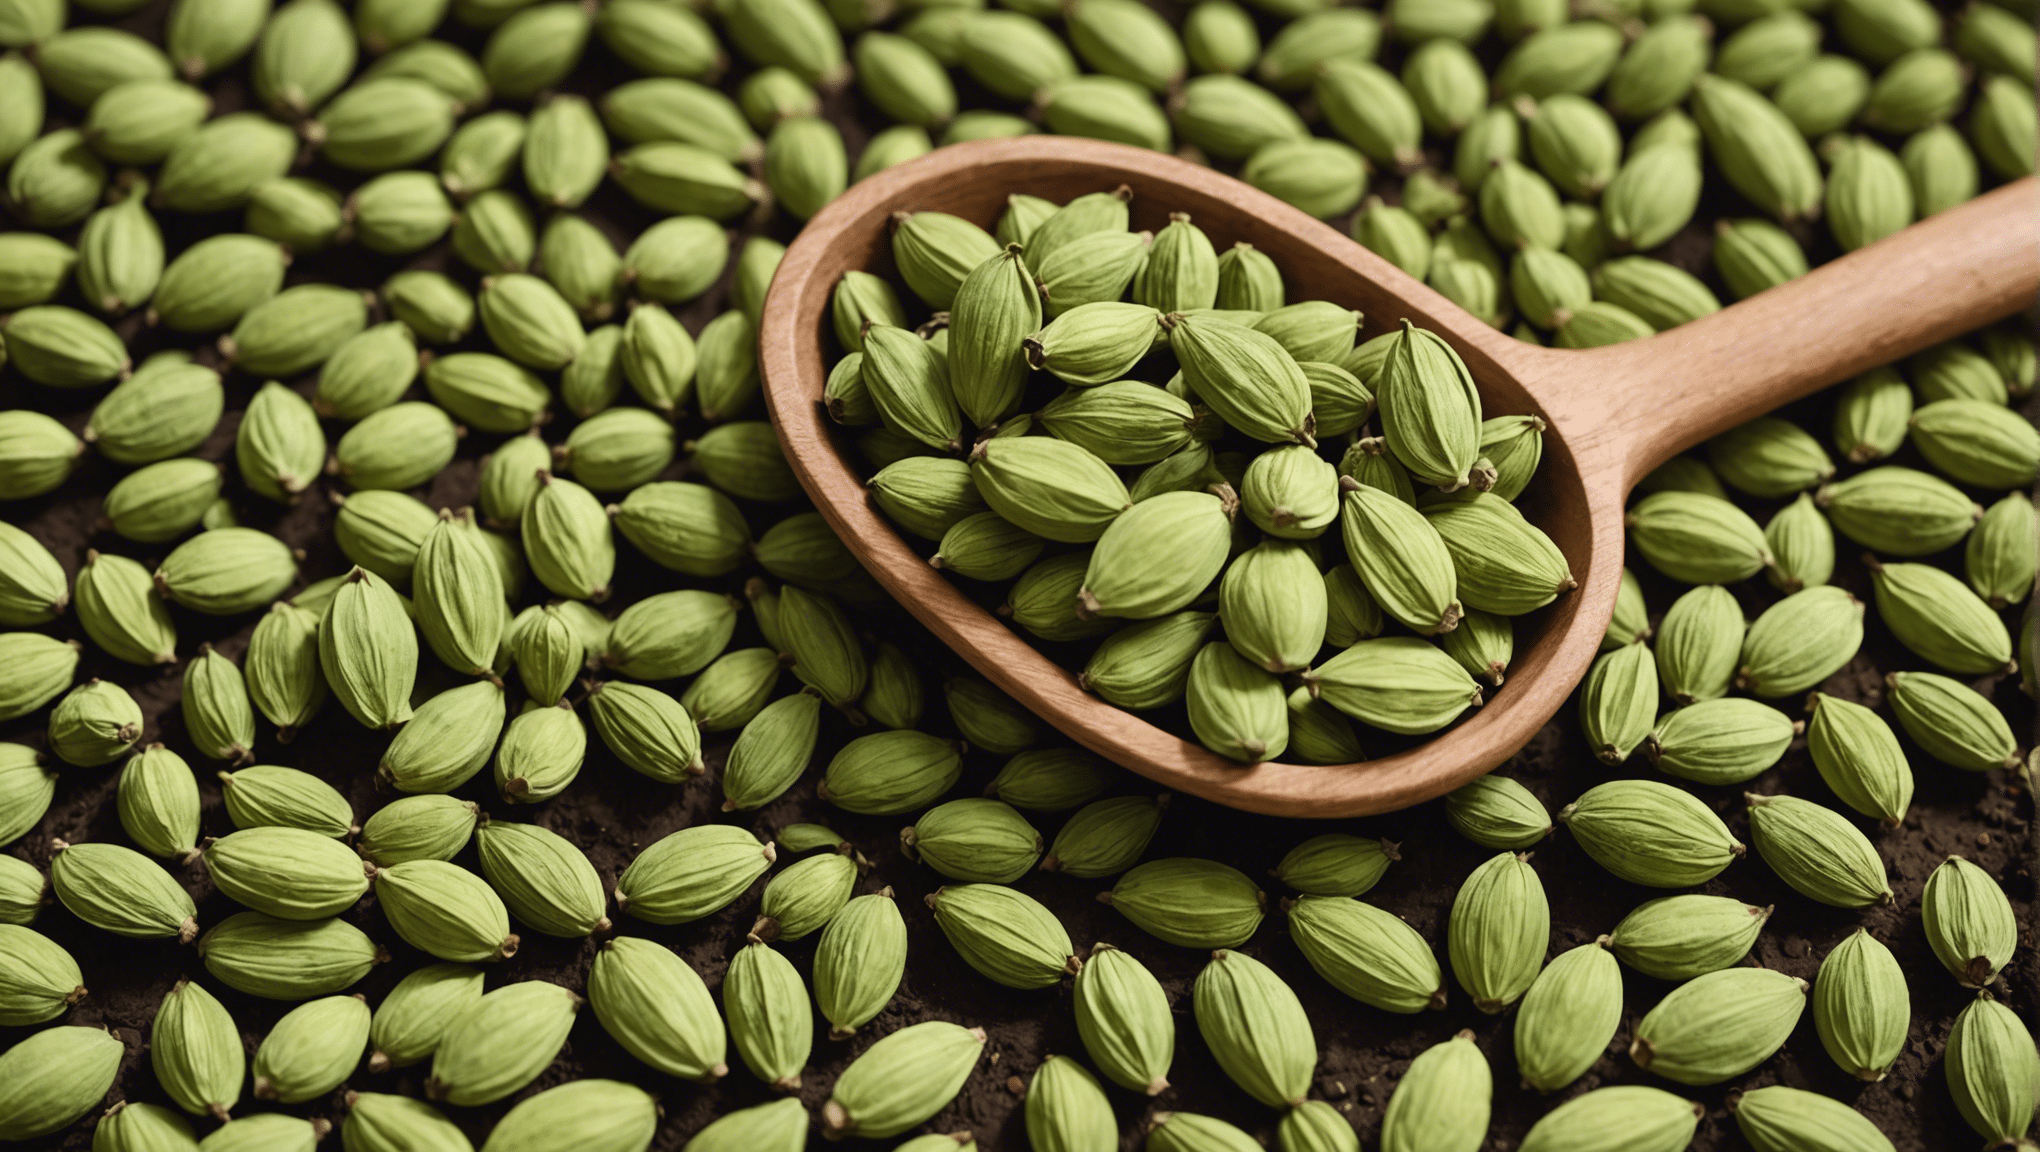 discover the numerous benefits of cardamom seeds and how they can enhance your health and well-being.